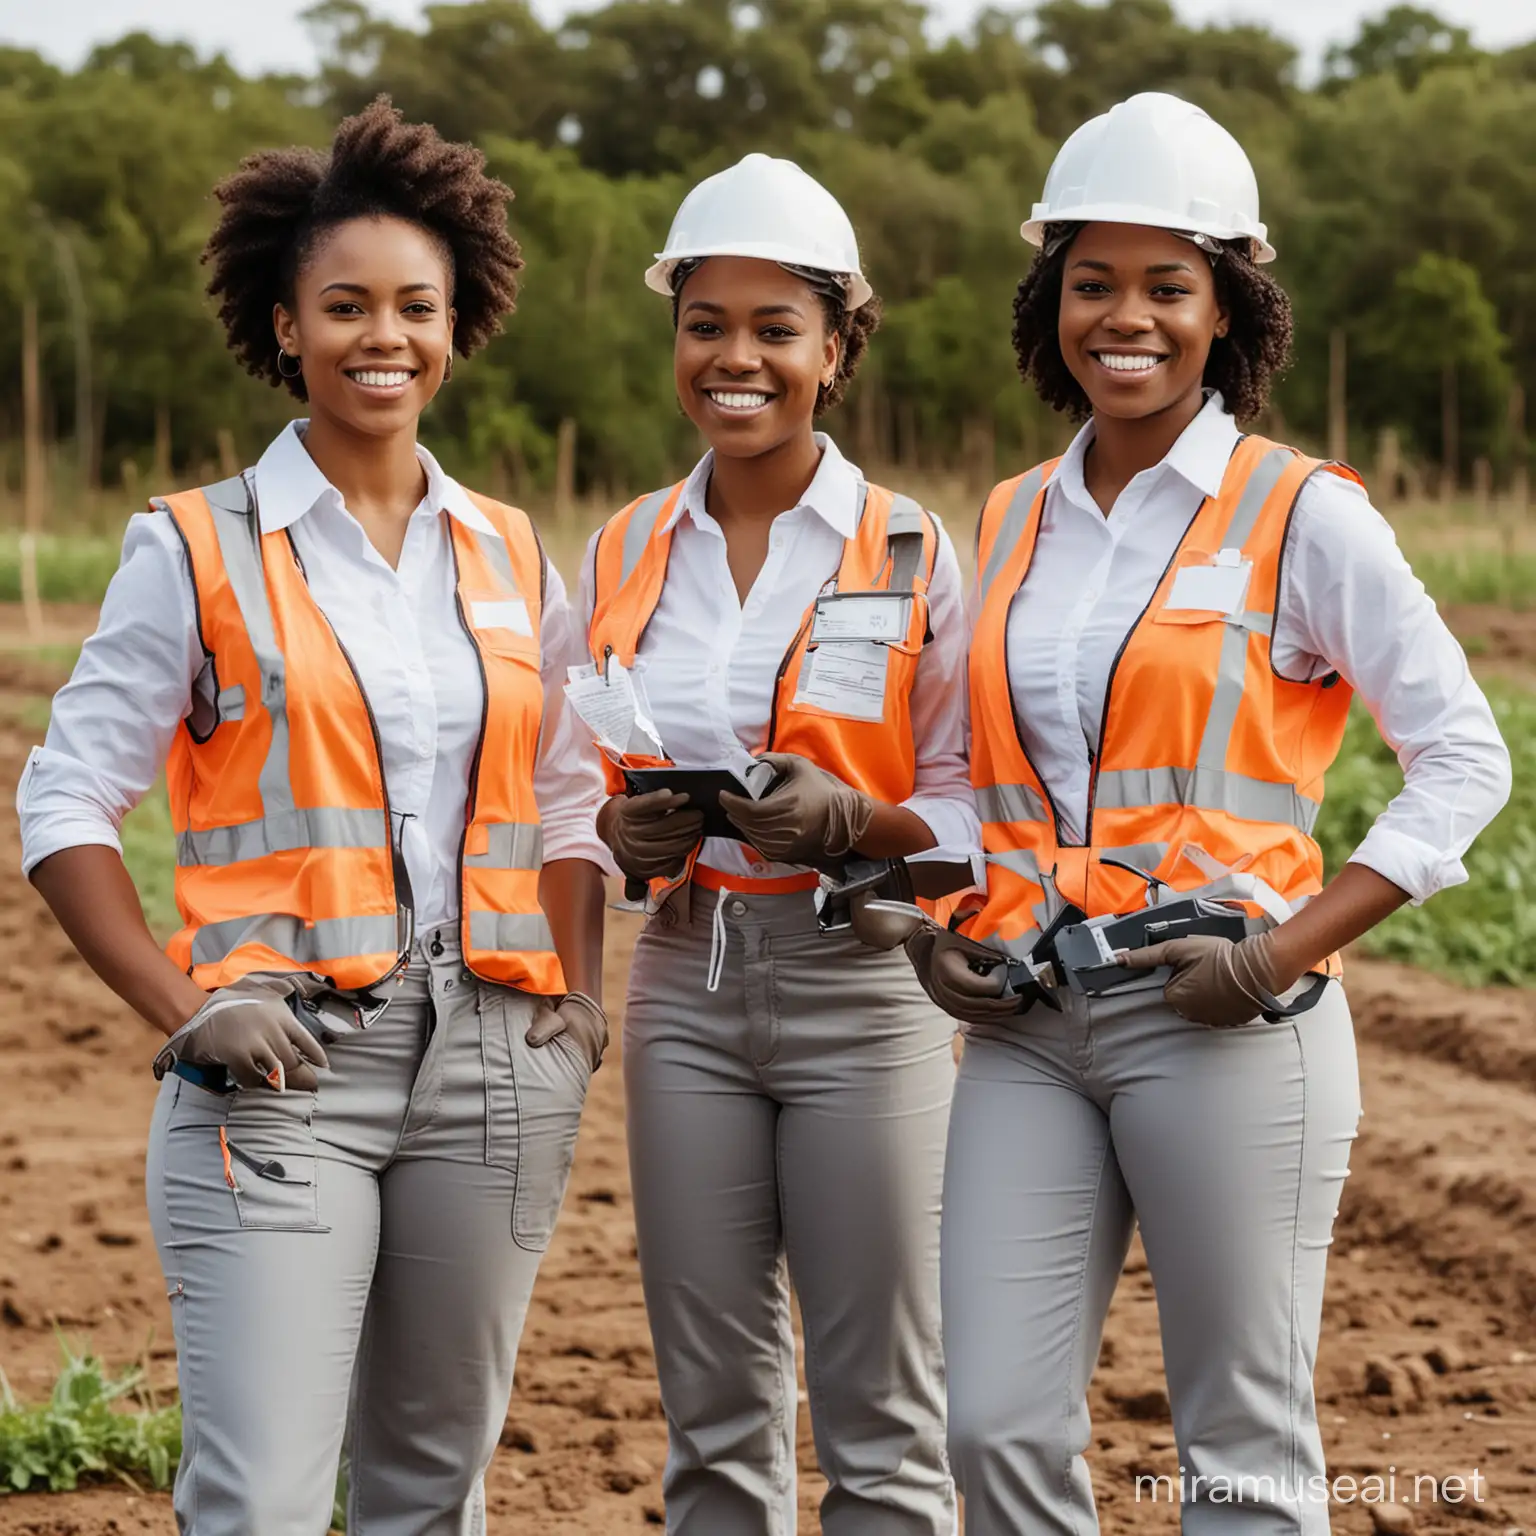 Smiling African American Women Surveying Technicians with Measuring Instruments